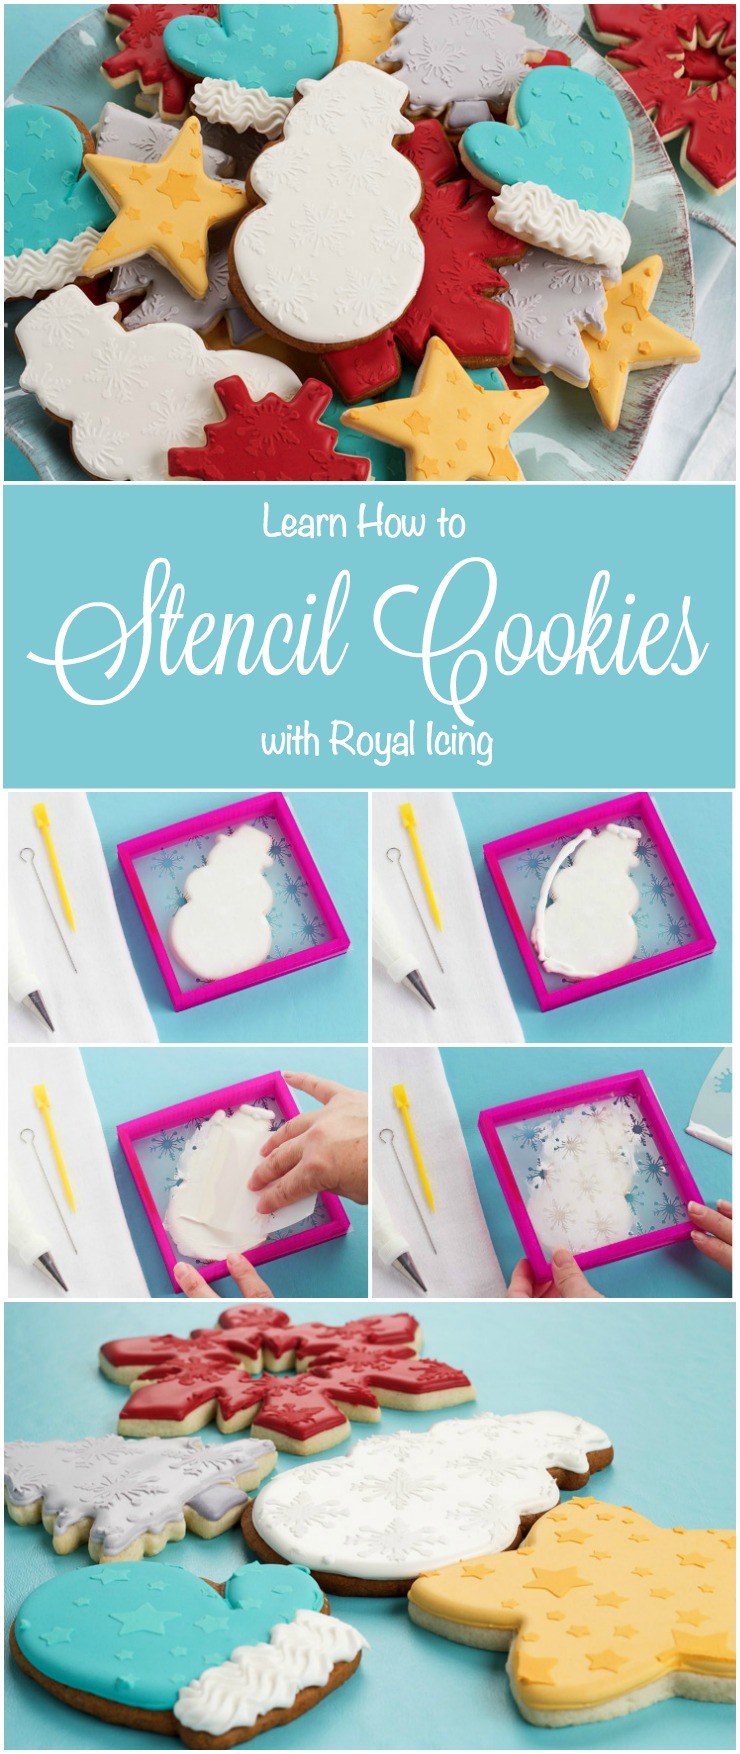 Learn How to Stencil Cookies with Royal Icing and Decorate Like a Pro The Bearfoot Baker